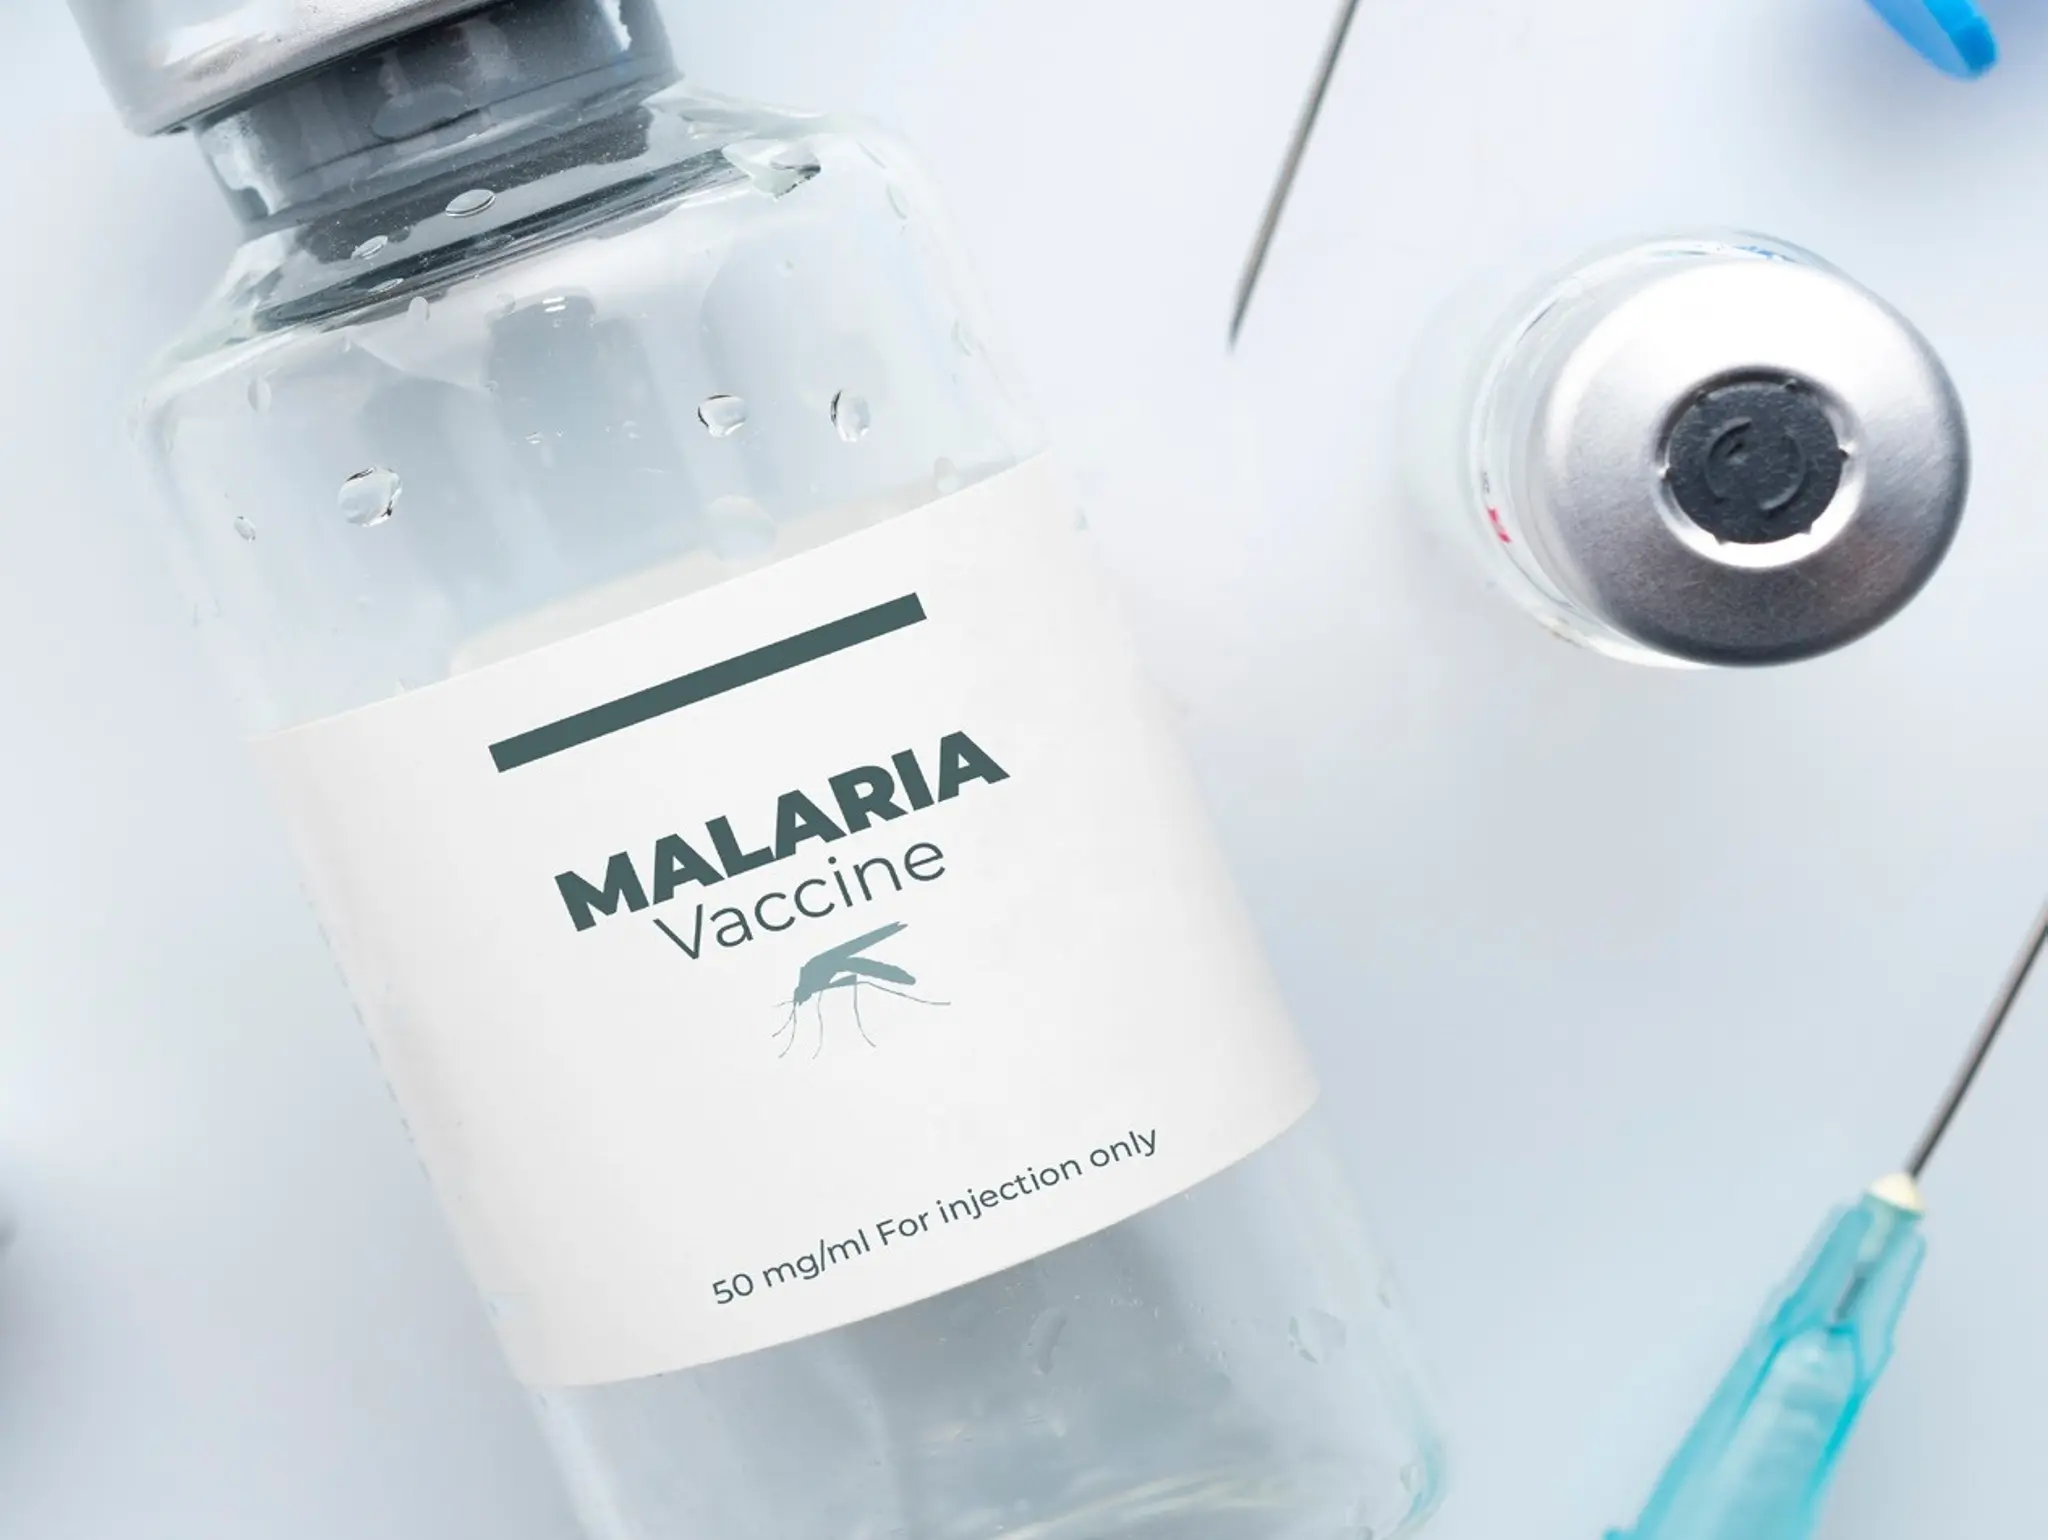 New vaccine for prevention of malaria in paediatric patients recommended by WHO